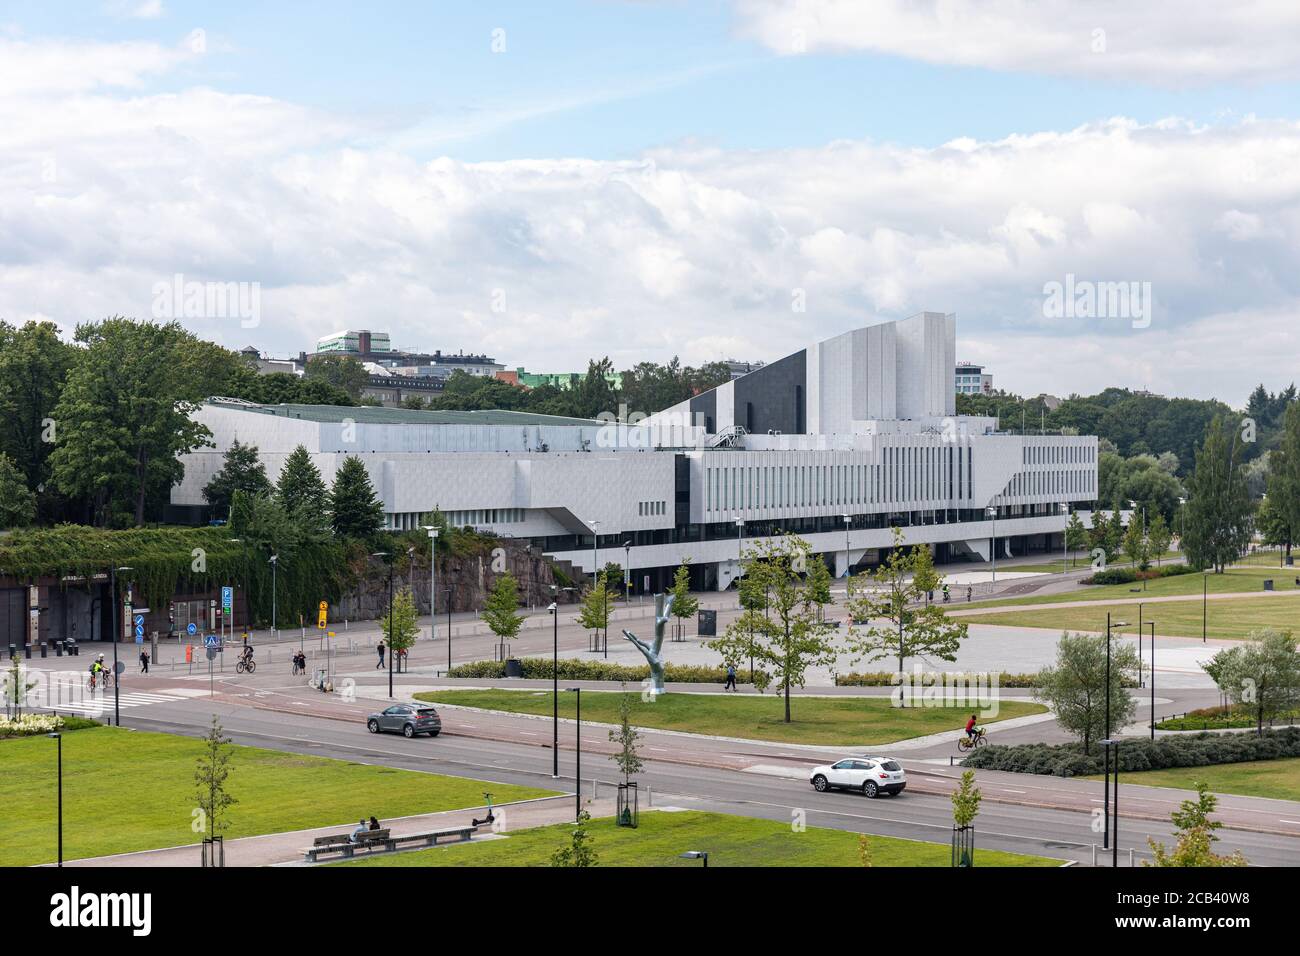 Congress and event venue Finlandia Hall, designed by architect Alvar Aalto and completed in 1971, in Töölö district of Helsinki, Finland Stock Photo